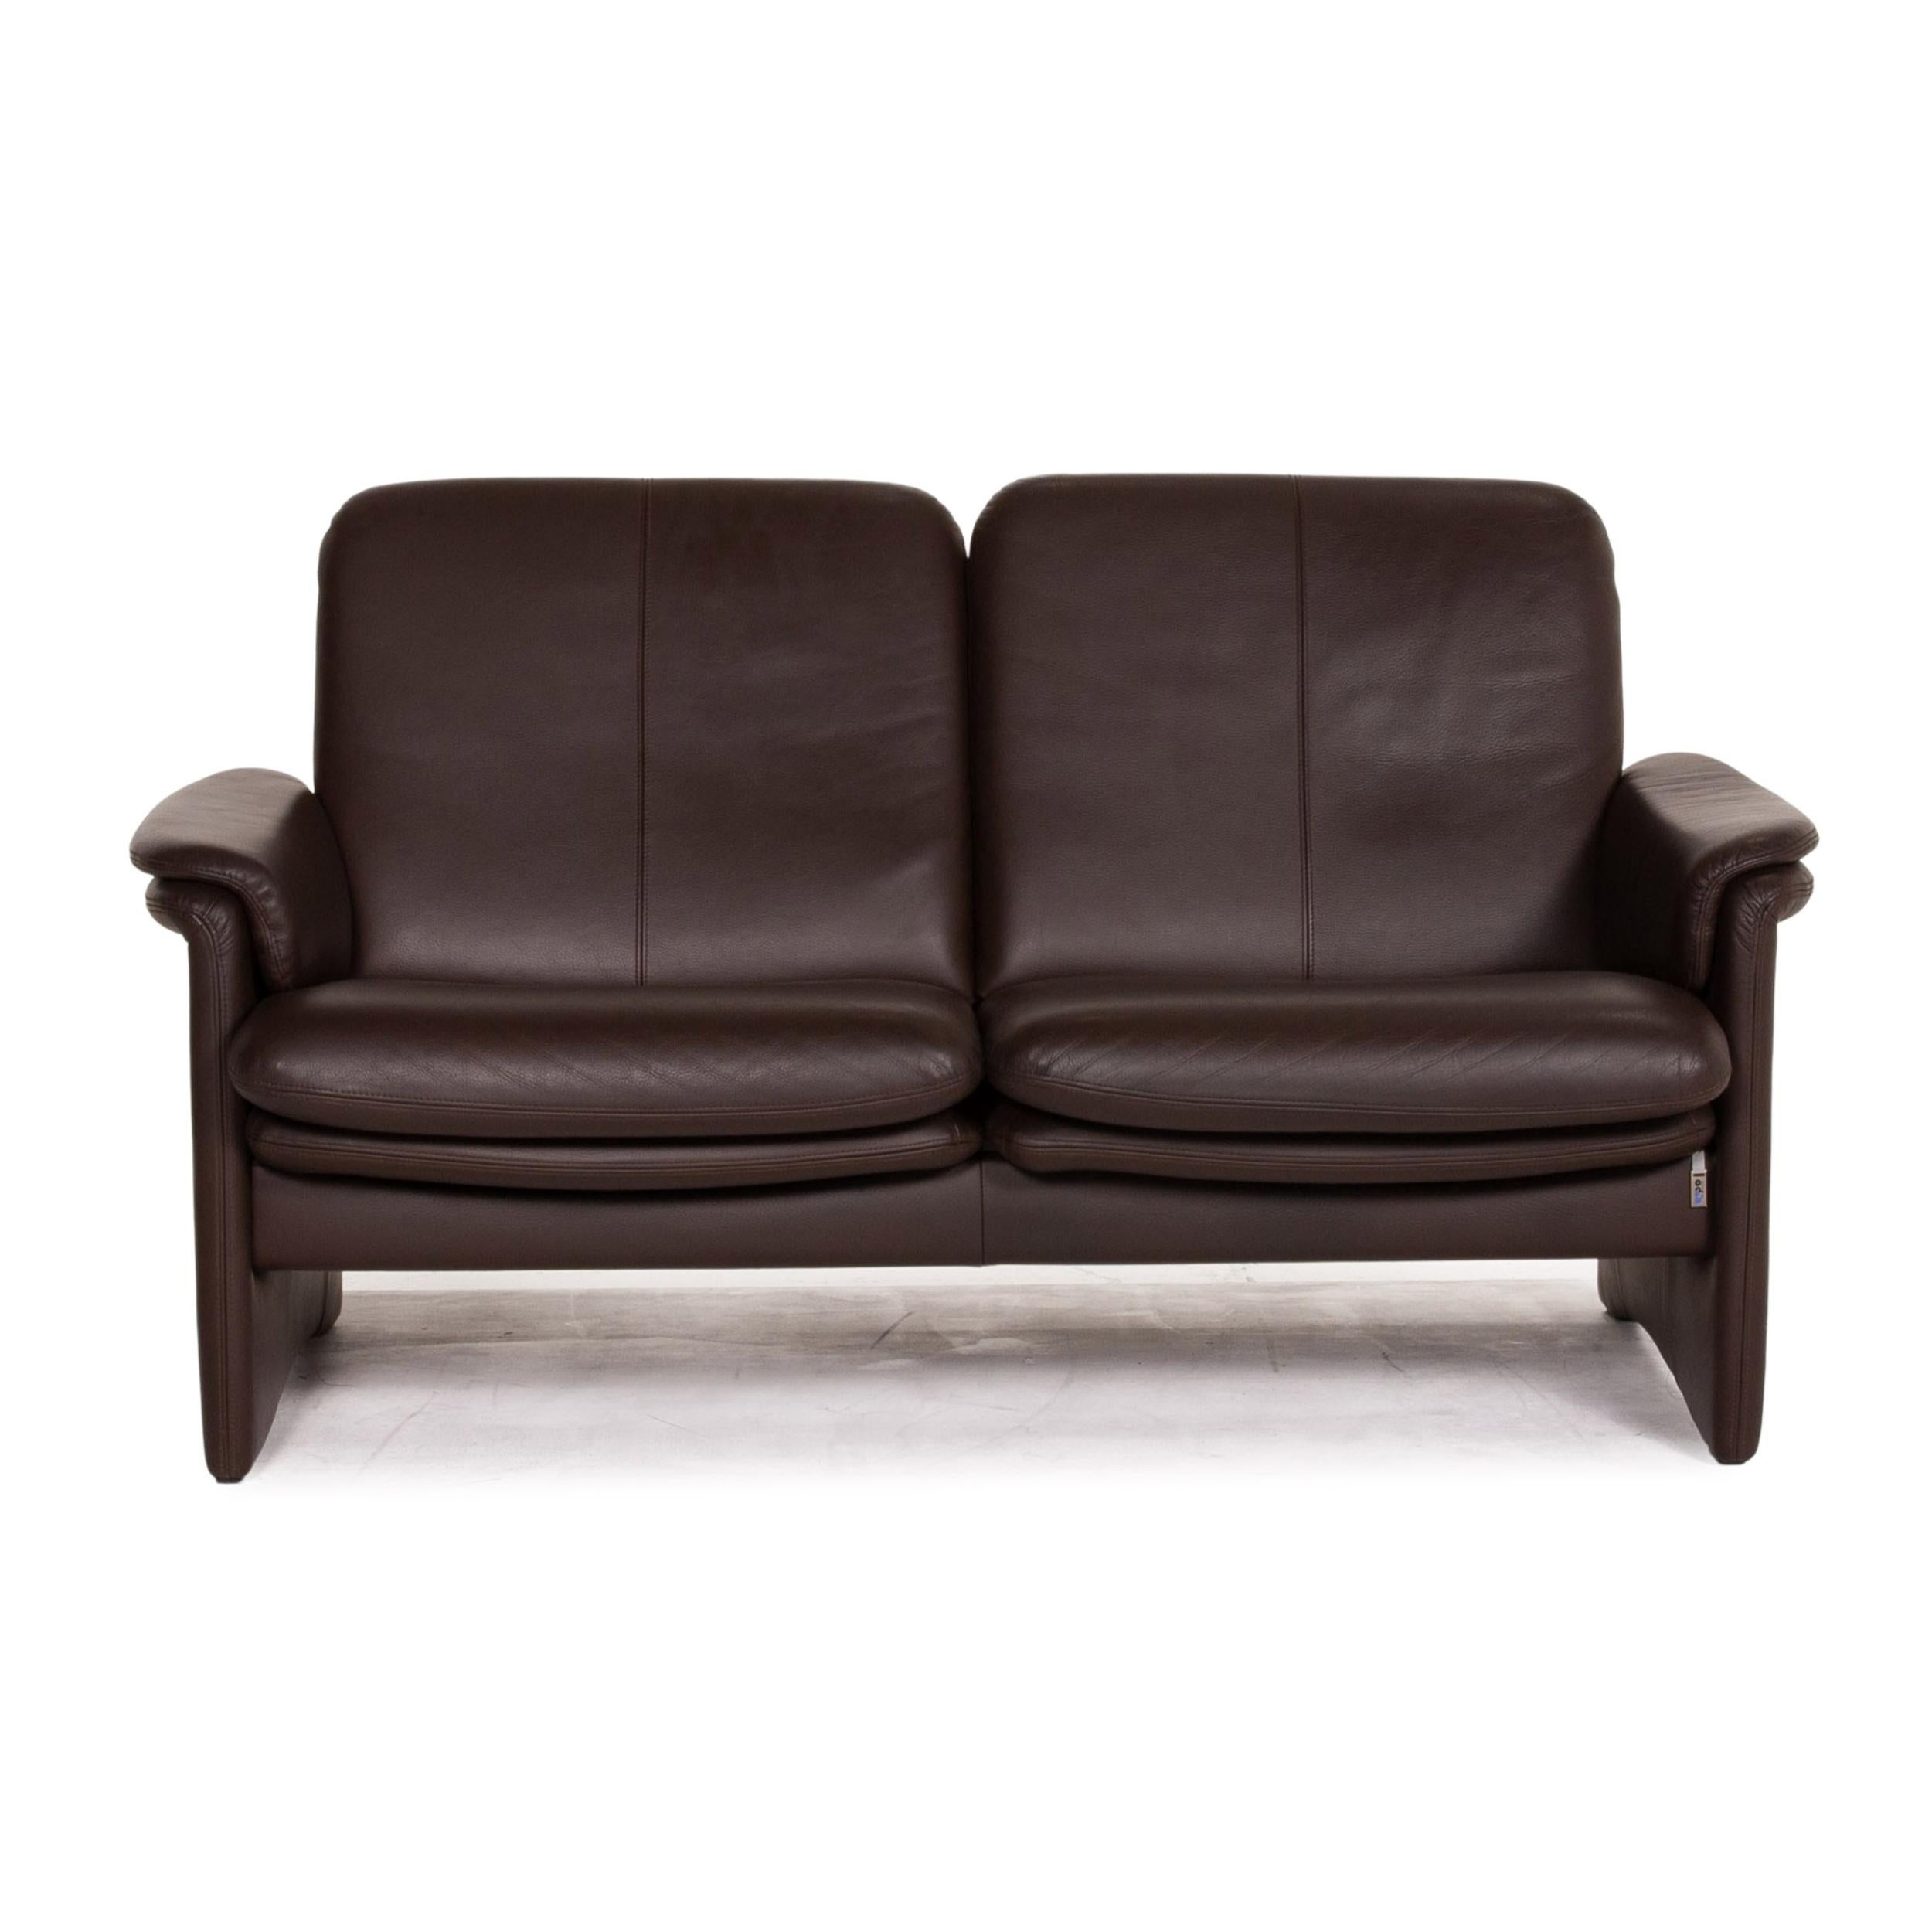 Erpo City Leather Sofa Brown Dark Brown Two-Seat Couch For Sale 2